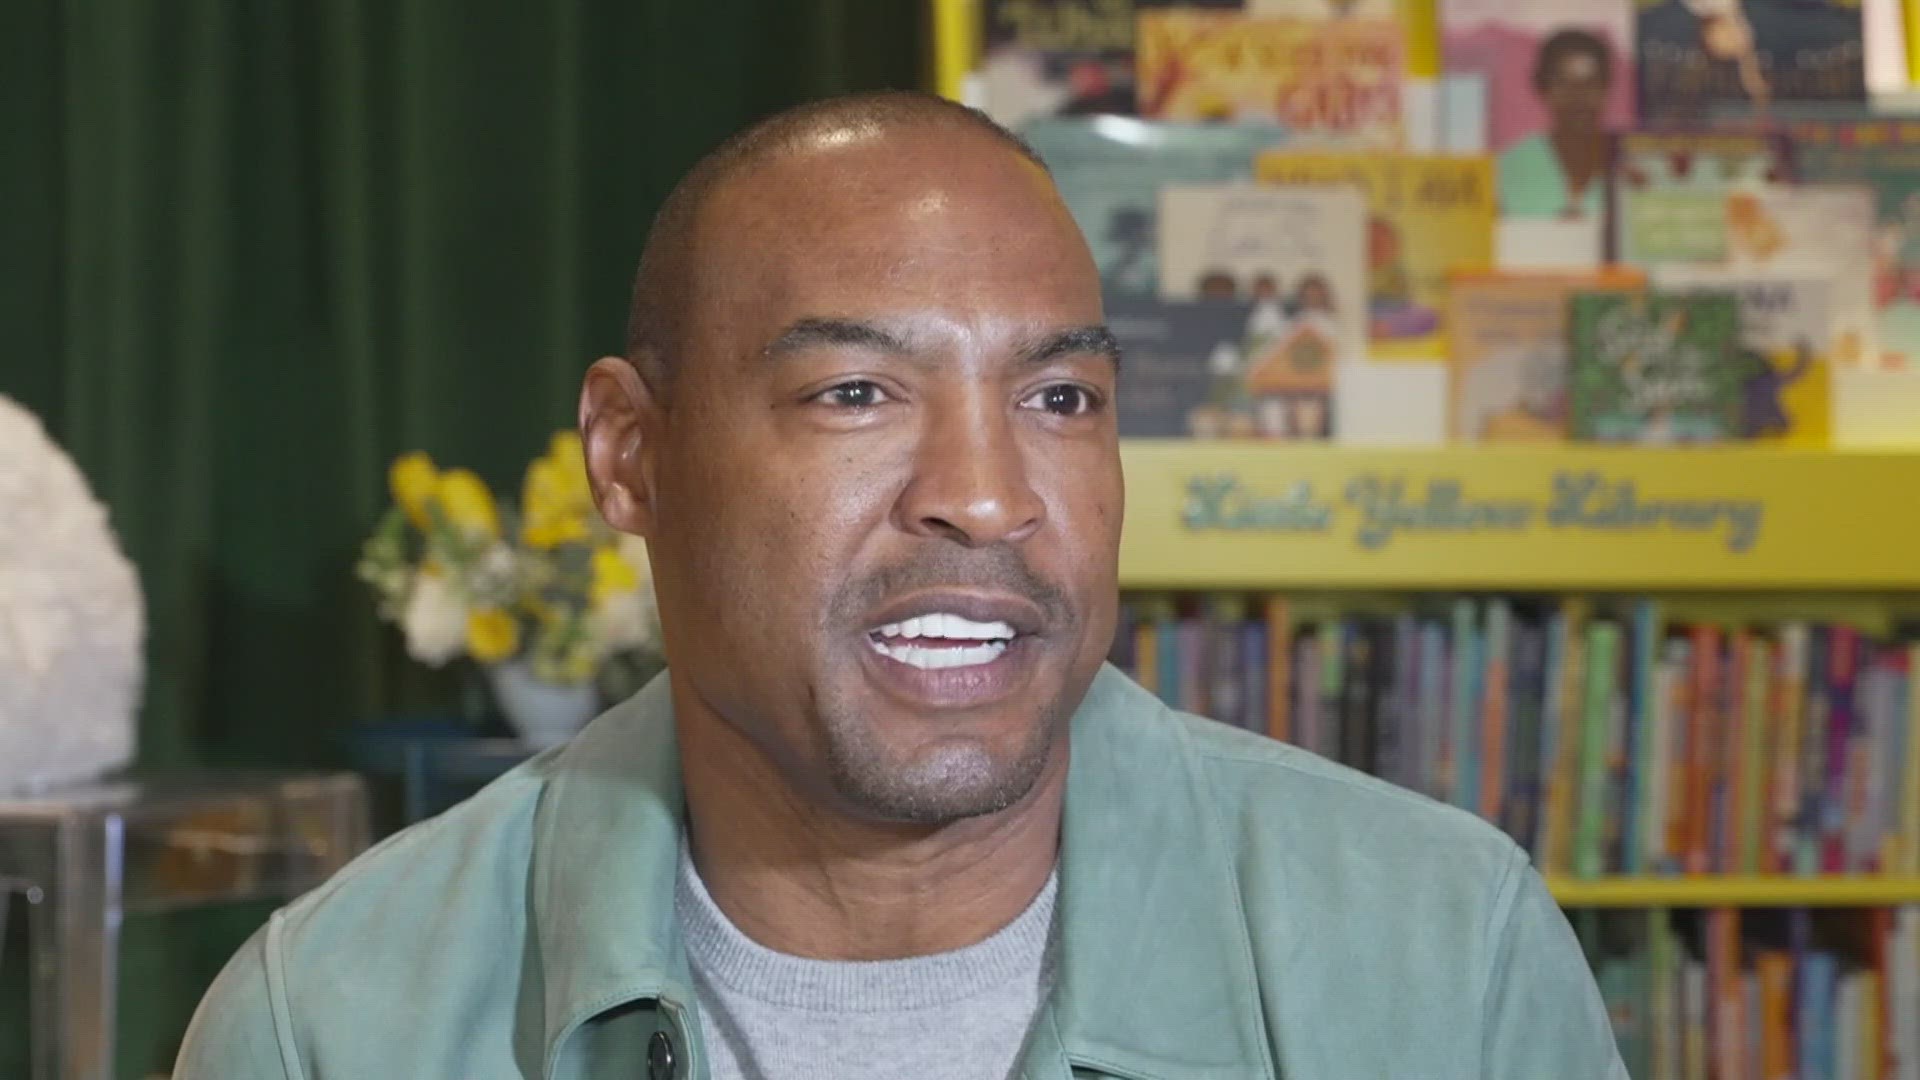 Former Cowboys player and Pro Football Hall of Fame semifinalist Darren Woodson provided a book reading at the Kendra Scott Foundation's dedication in Dallas.